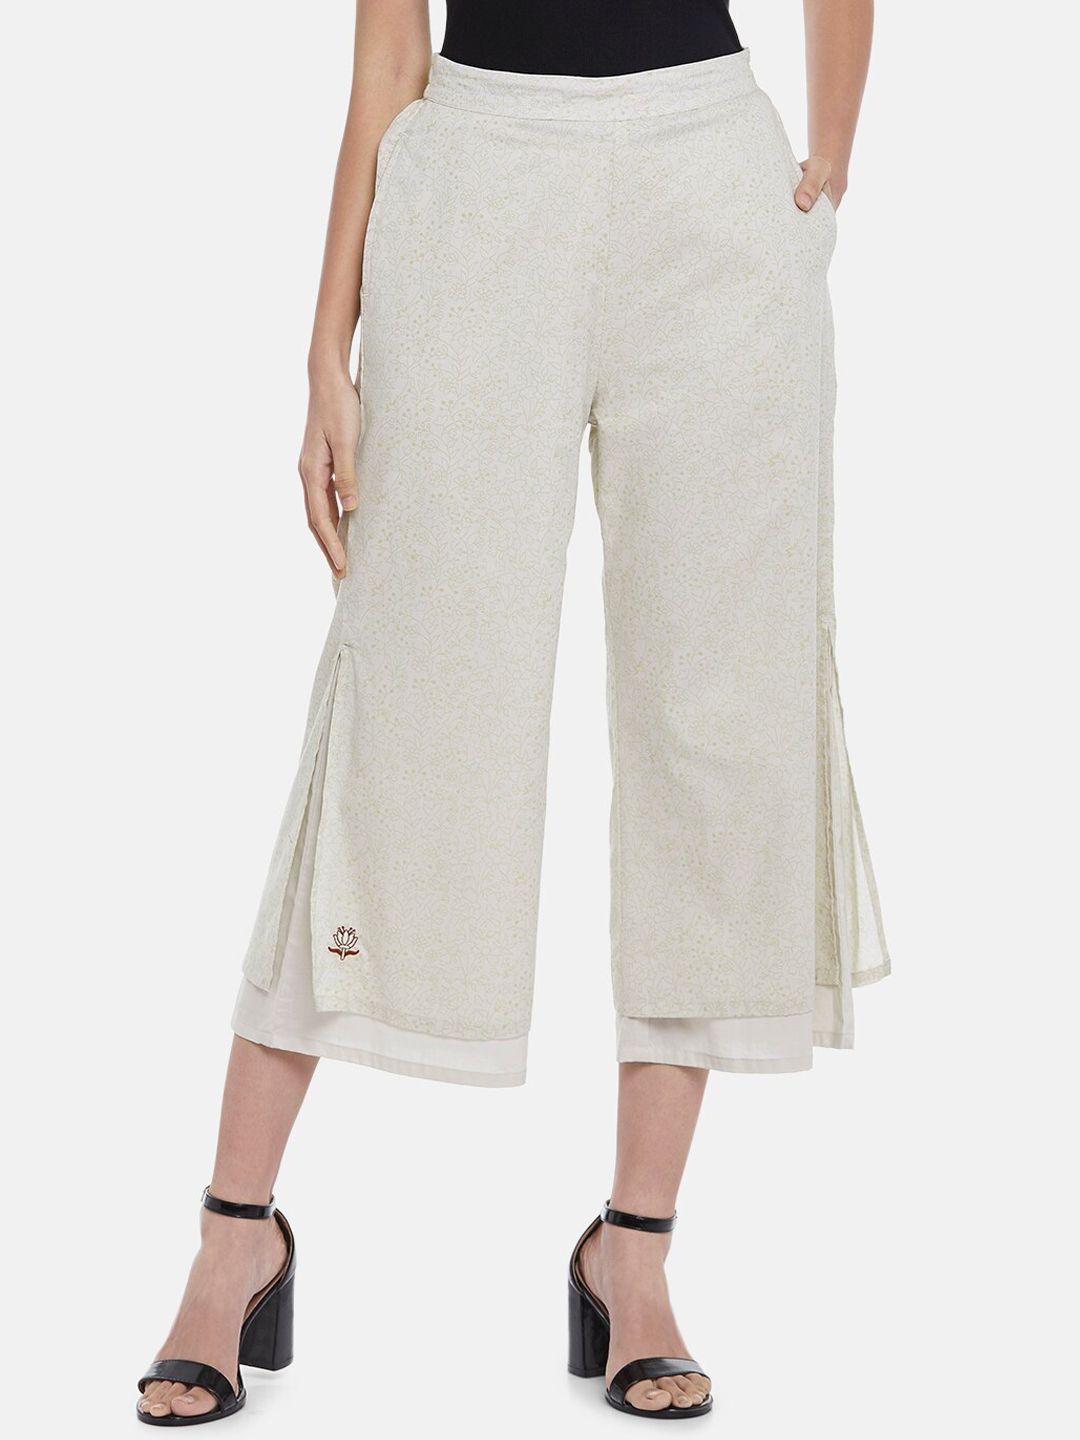 people women off-white printed layered flared cotton culottes trousers